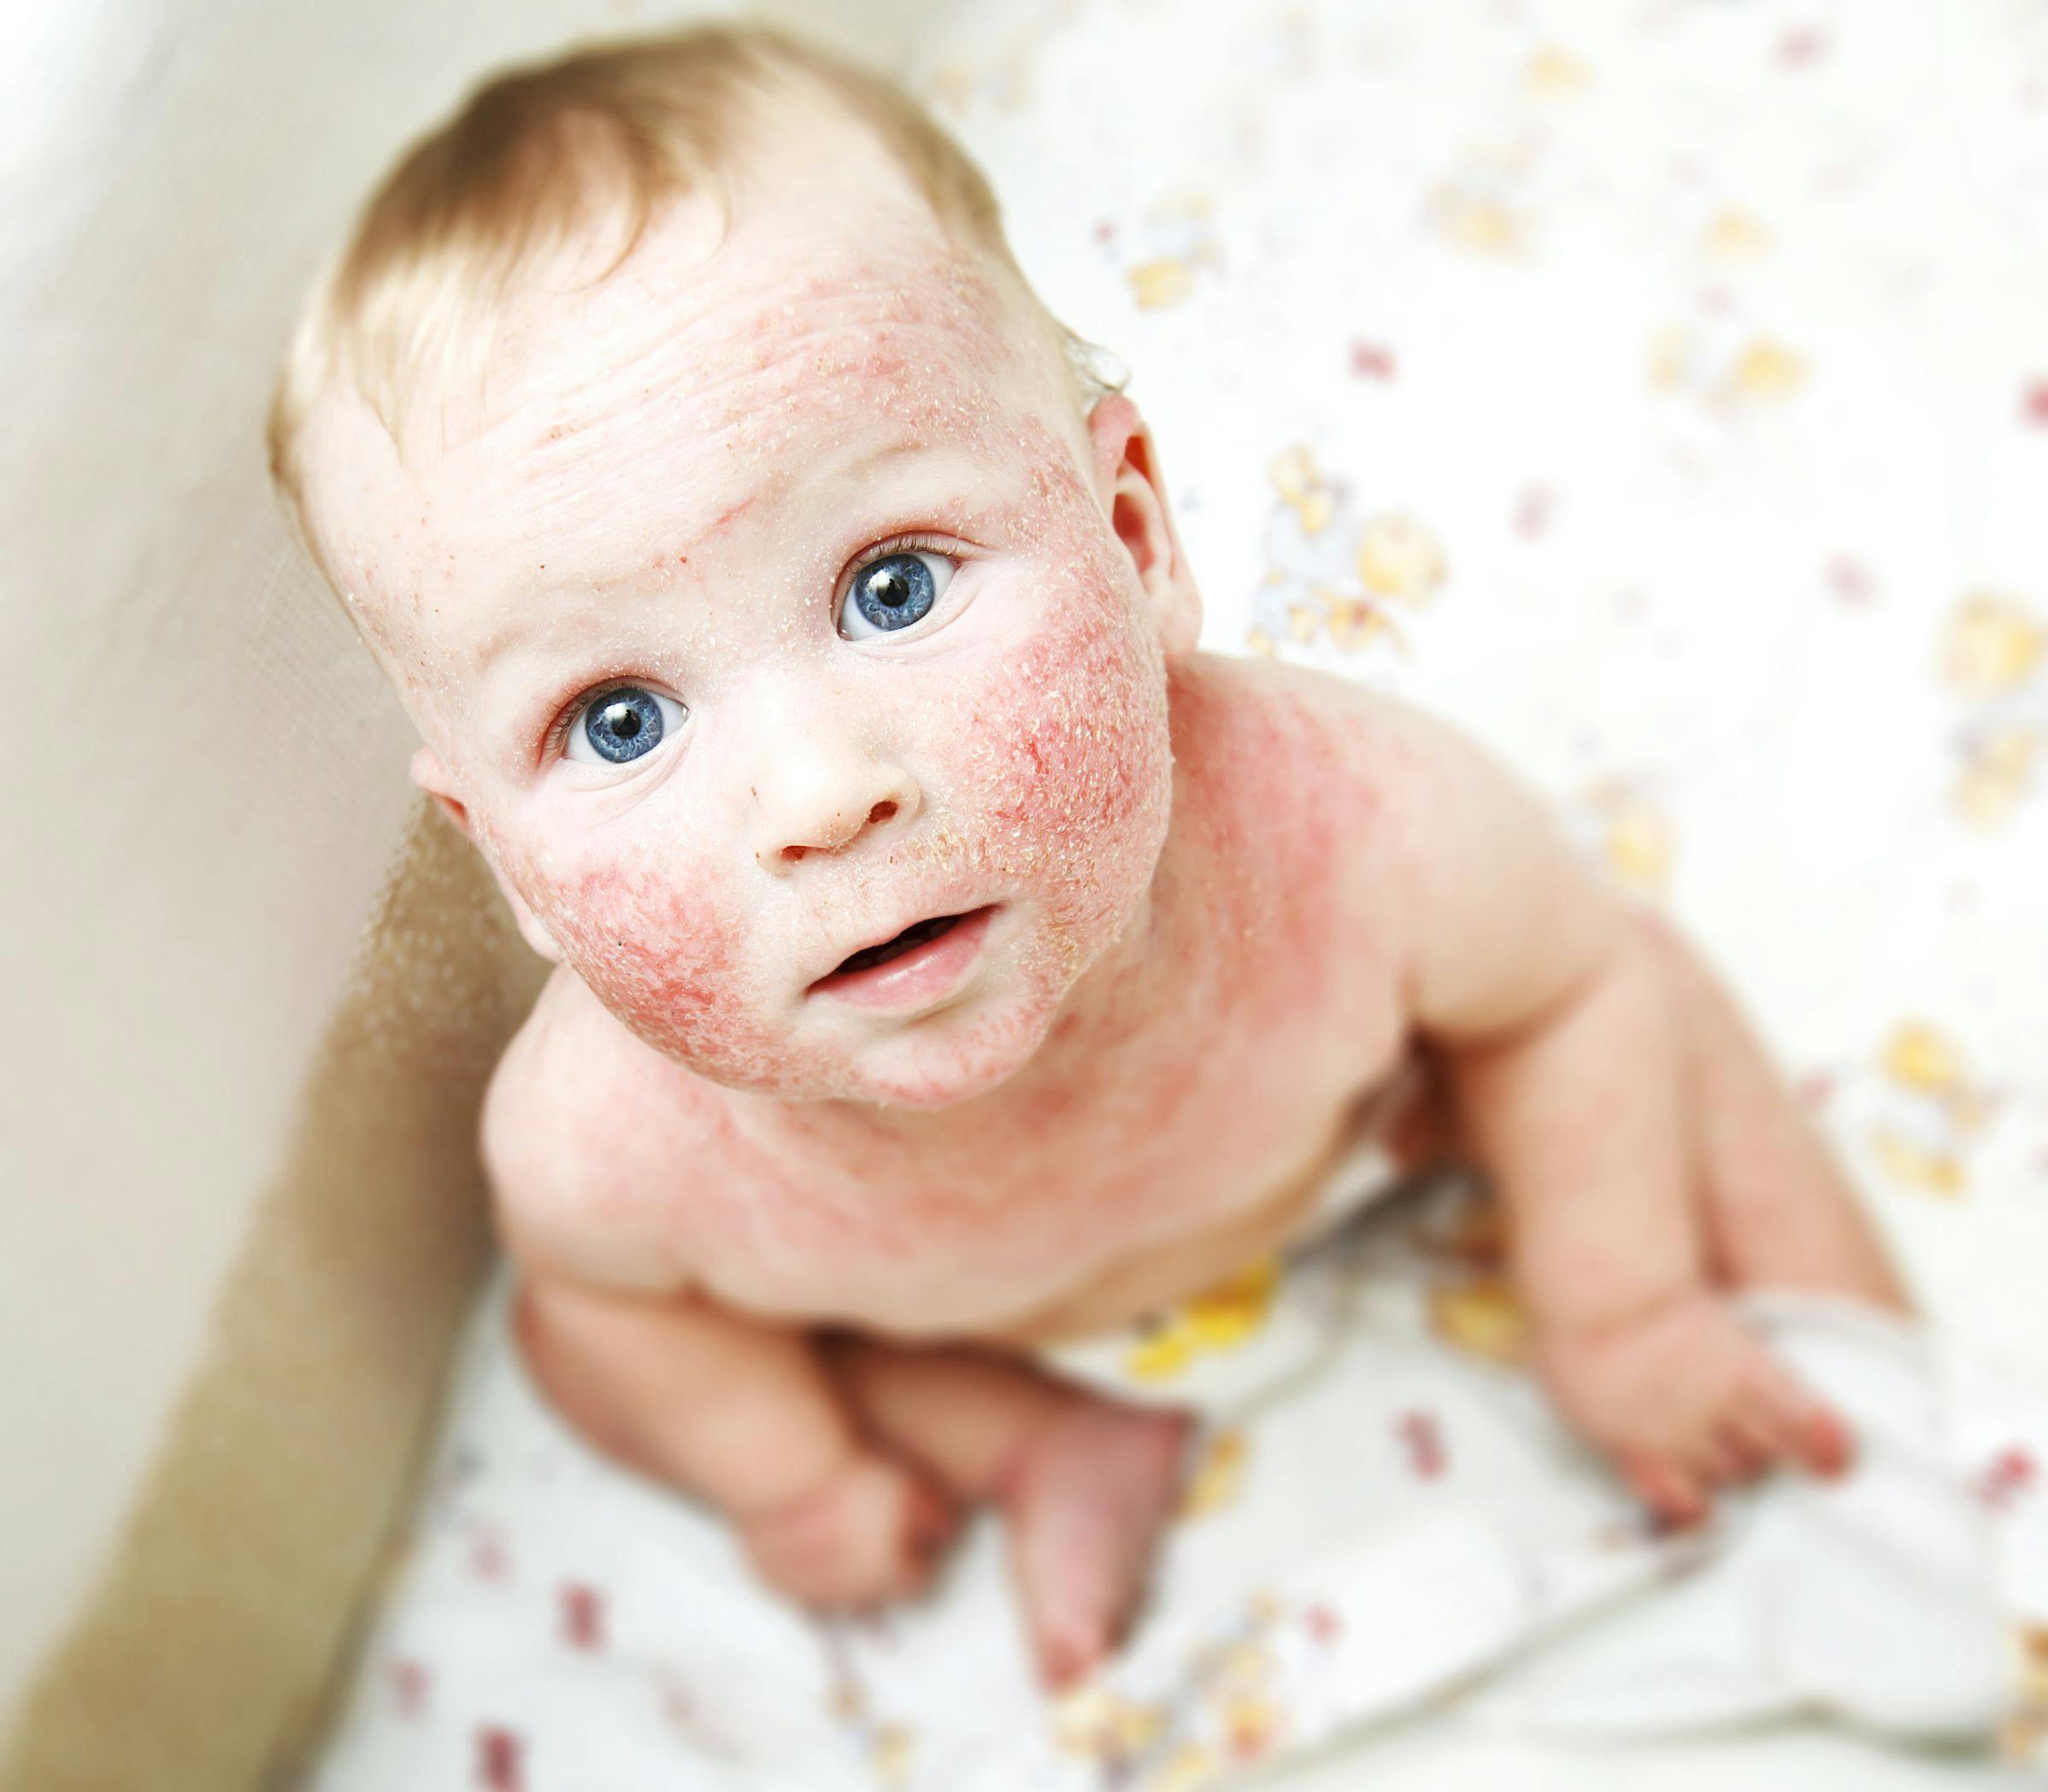 baby with atopic dermatitis